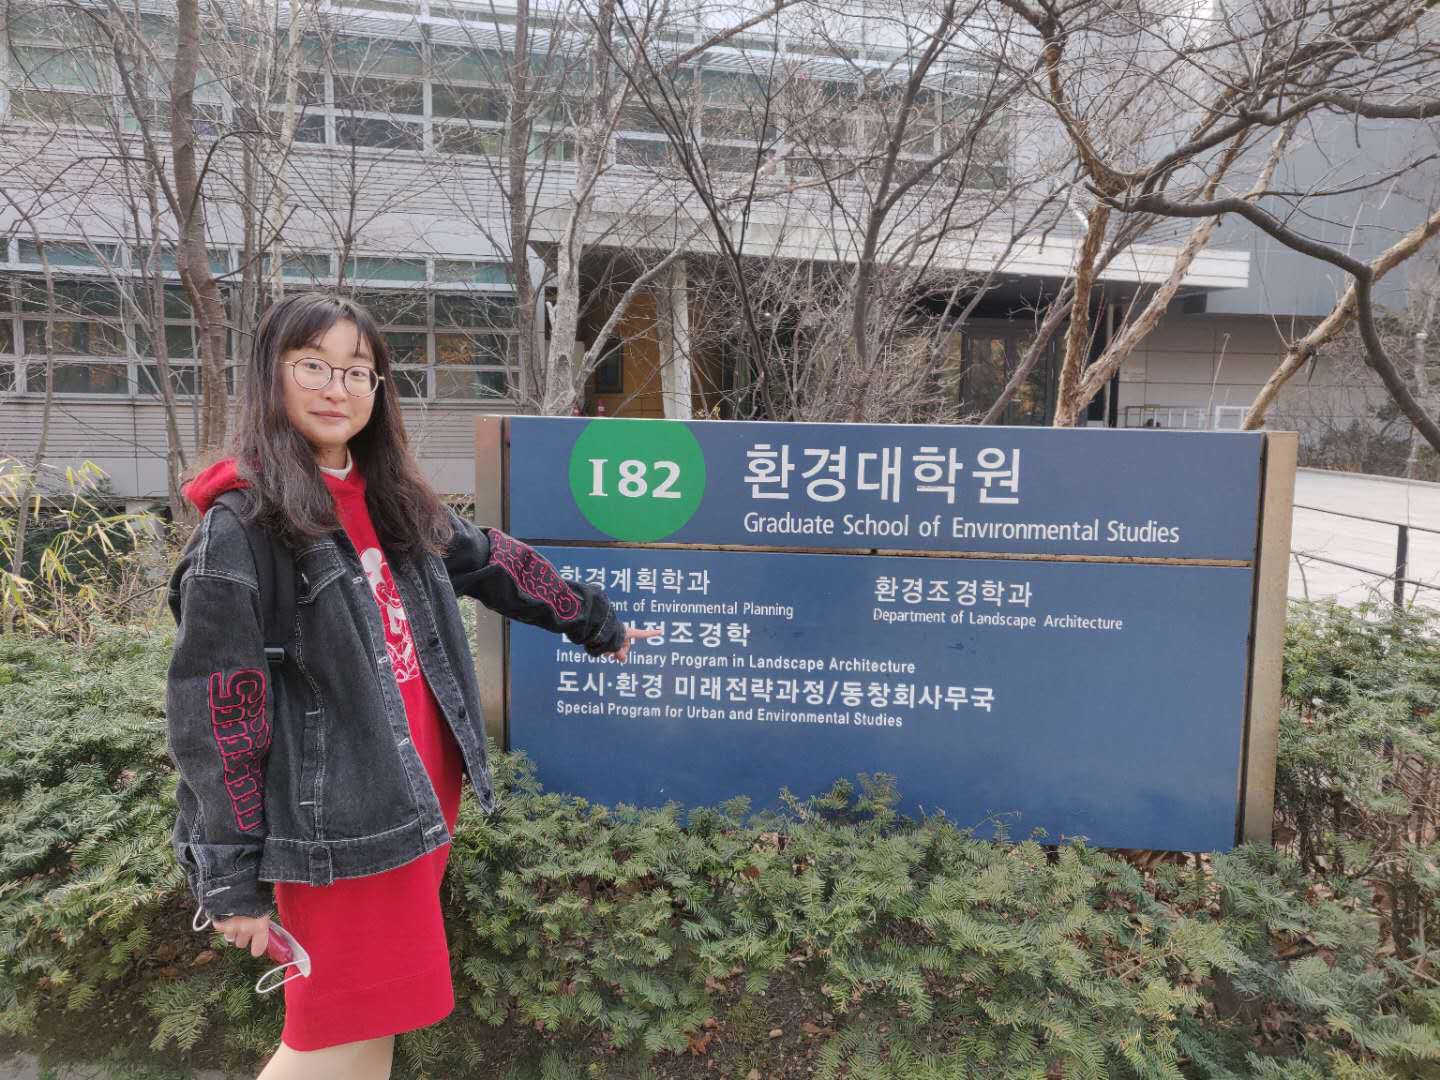 SUSTech Students on Exchange: Female scientist explores future direction in South Korea